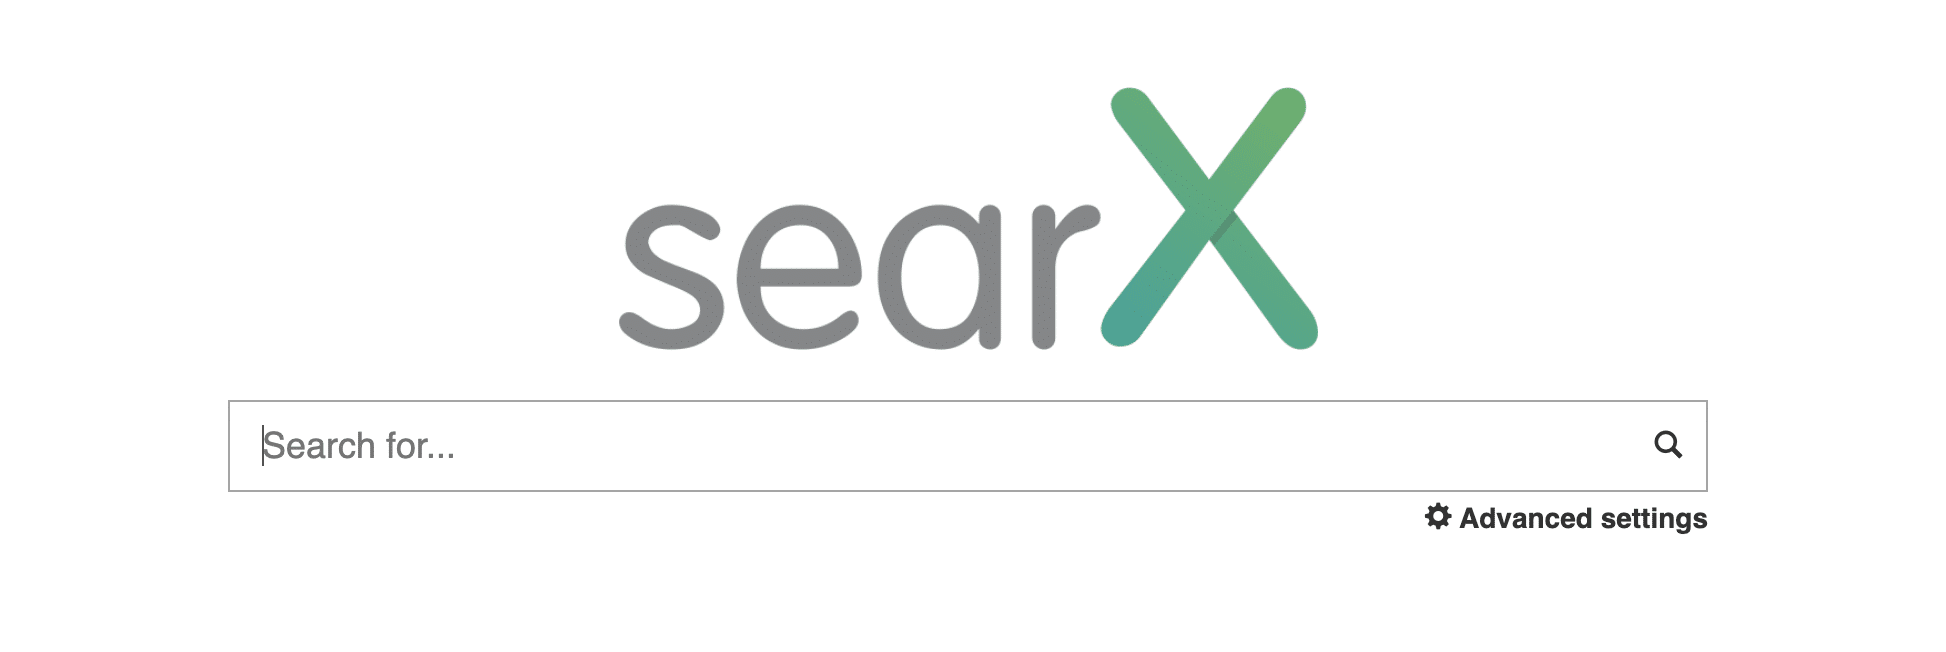 screenshot shows landing page for searX search engine